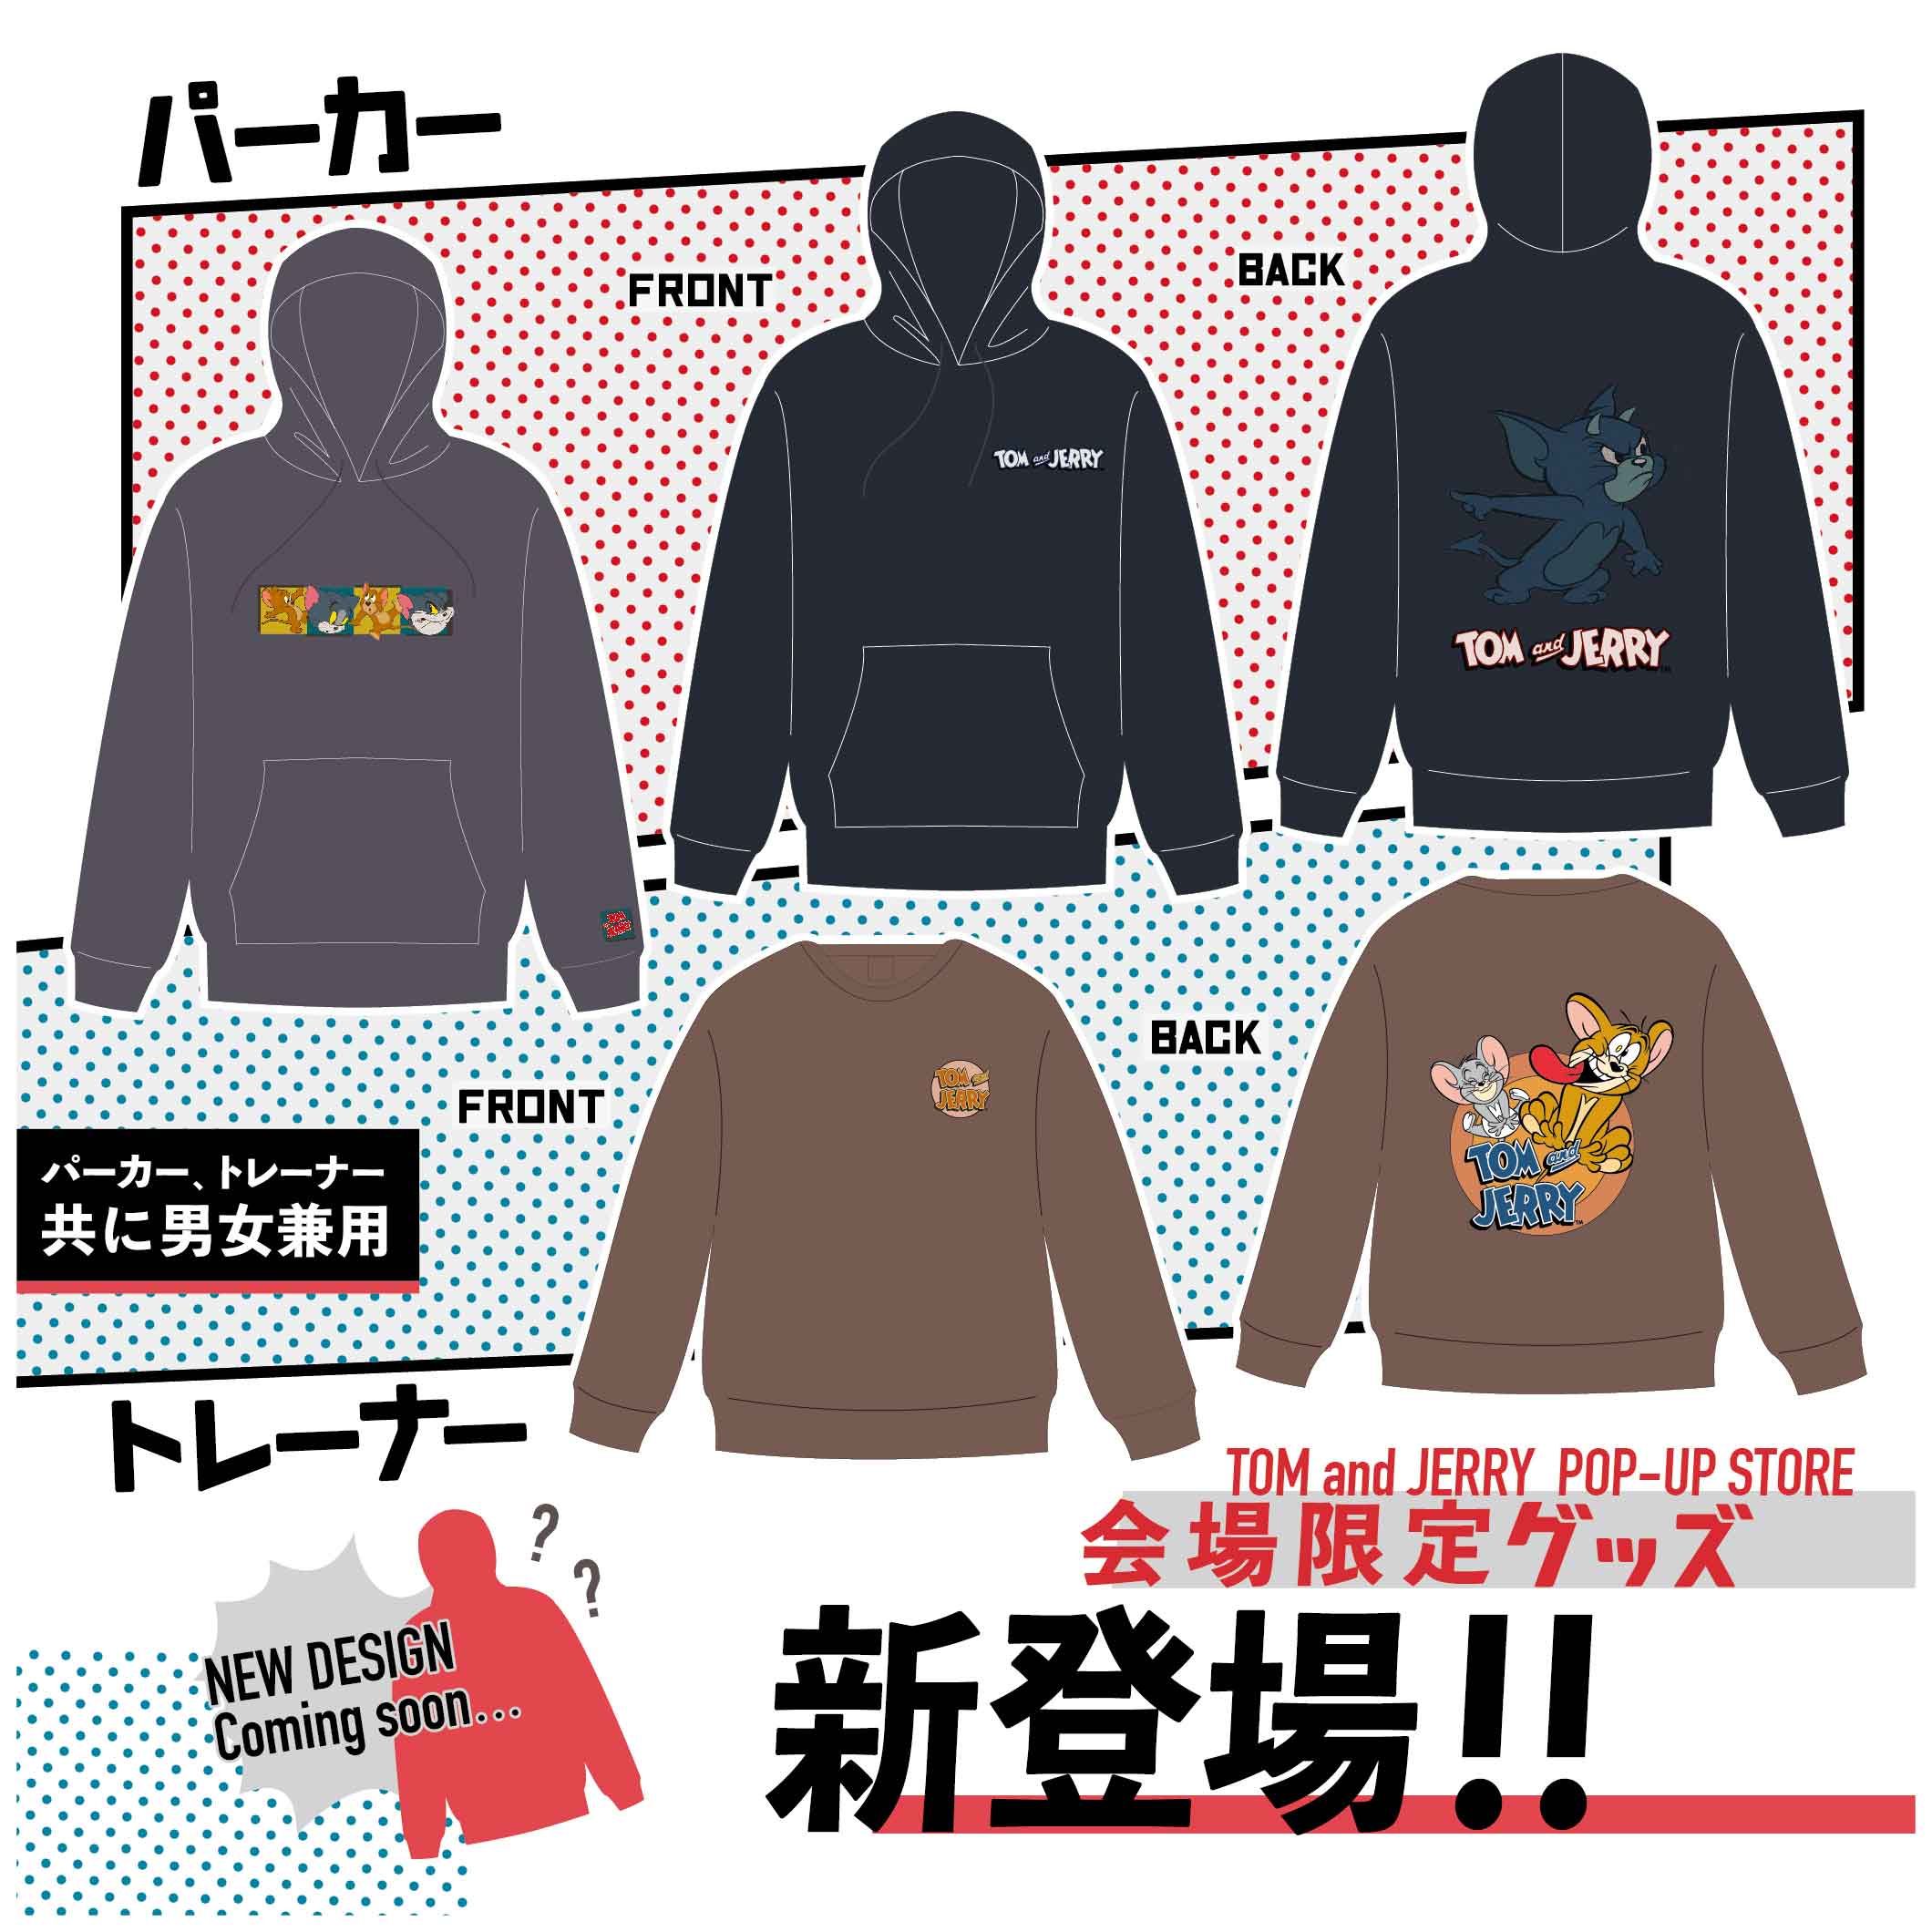 「TOM and JERRY POP UP STORE」《B》HAPPY BAG内会場限定パーカー・トレーナー